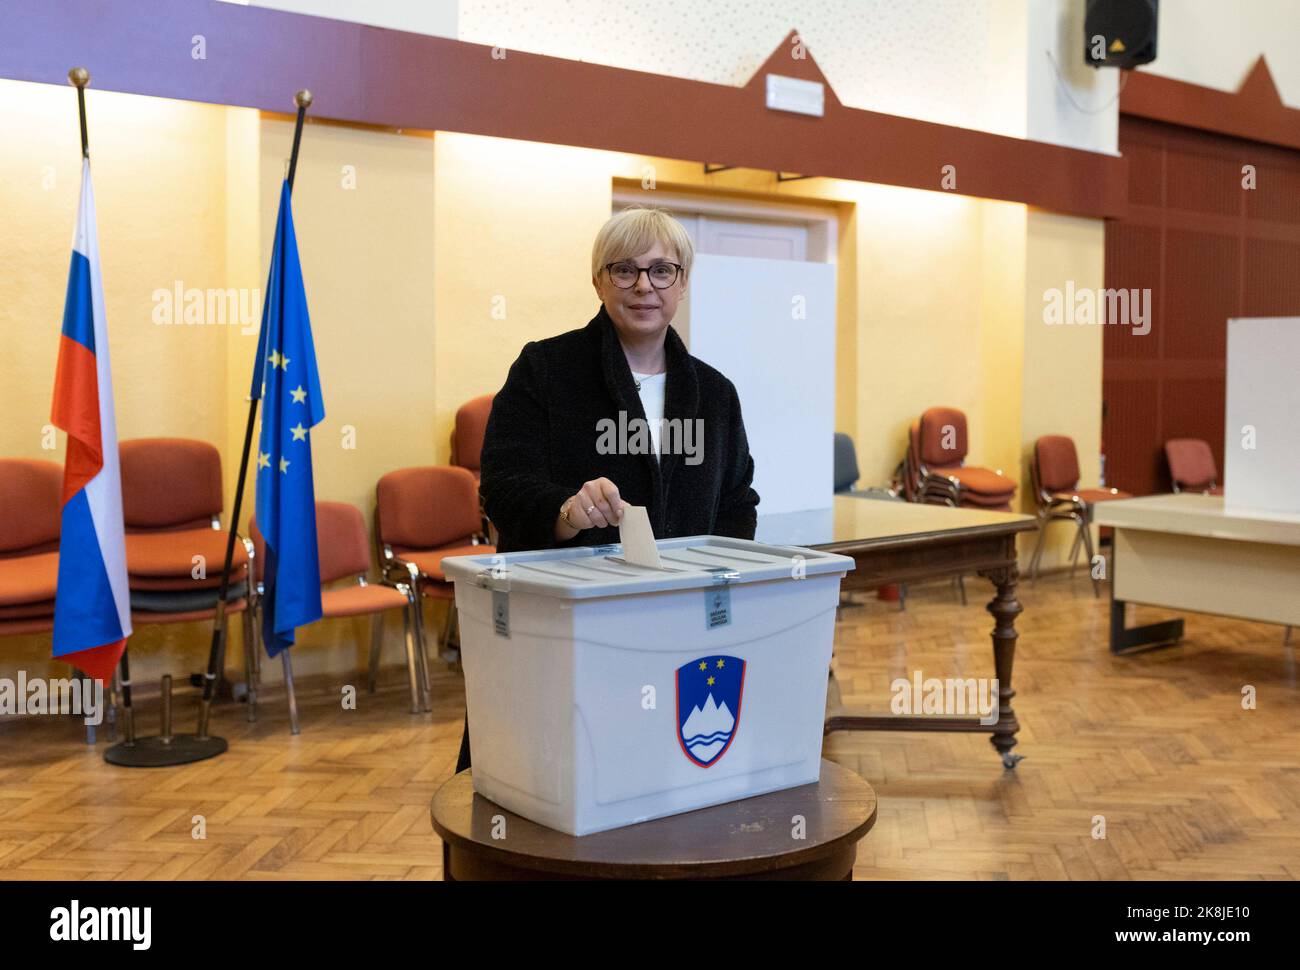 Ljubljana, Slovenia. 23rd Oct, 2022. Presidential candidate Natasa Pirc Musar casts ballot during the presidential election at a polling station in Radomlje, Slovenia, Oct. 23, 2022. Slovenia is due to hold the second round of presidential election on Nov. 13 after no candidate got majority in the first round held on Sunday. Credit: Zeljko Stevanic/Xinhua/Alamy Live News Stock Photo